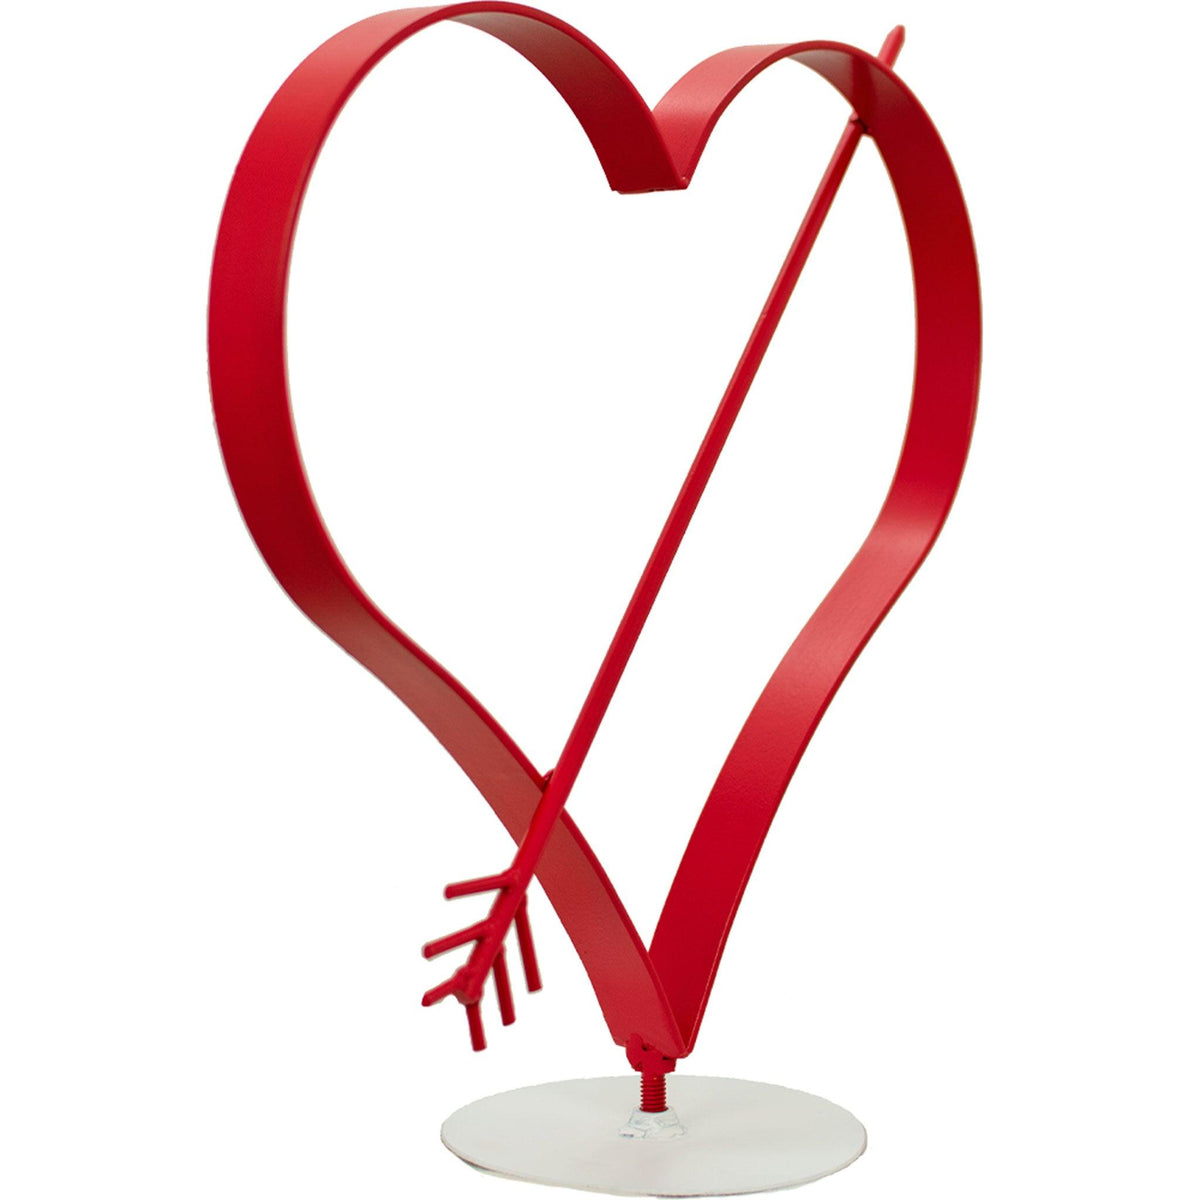 Lee Display's Valentine's Day Heart Centerpiece with Cupid's Arrow and Display Stand.  On sale at leedisplay.com